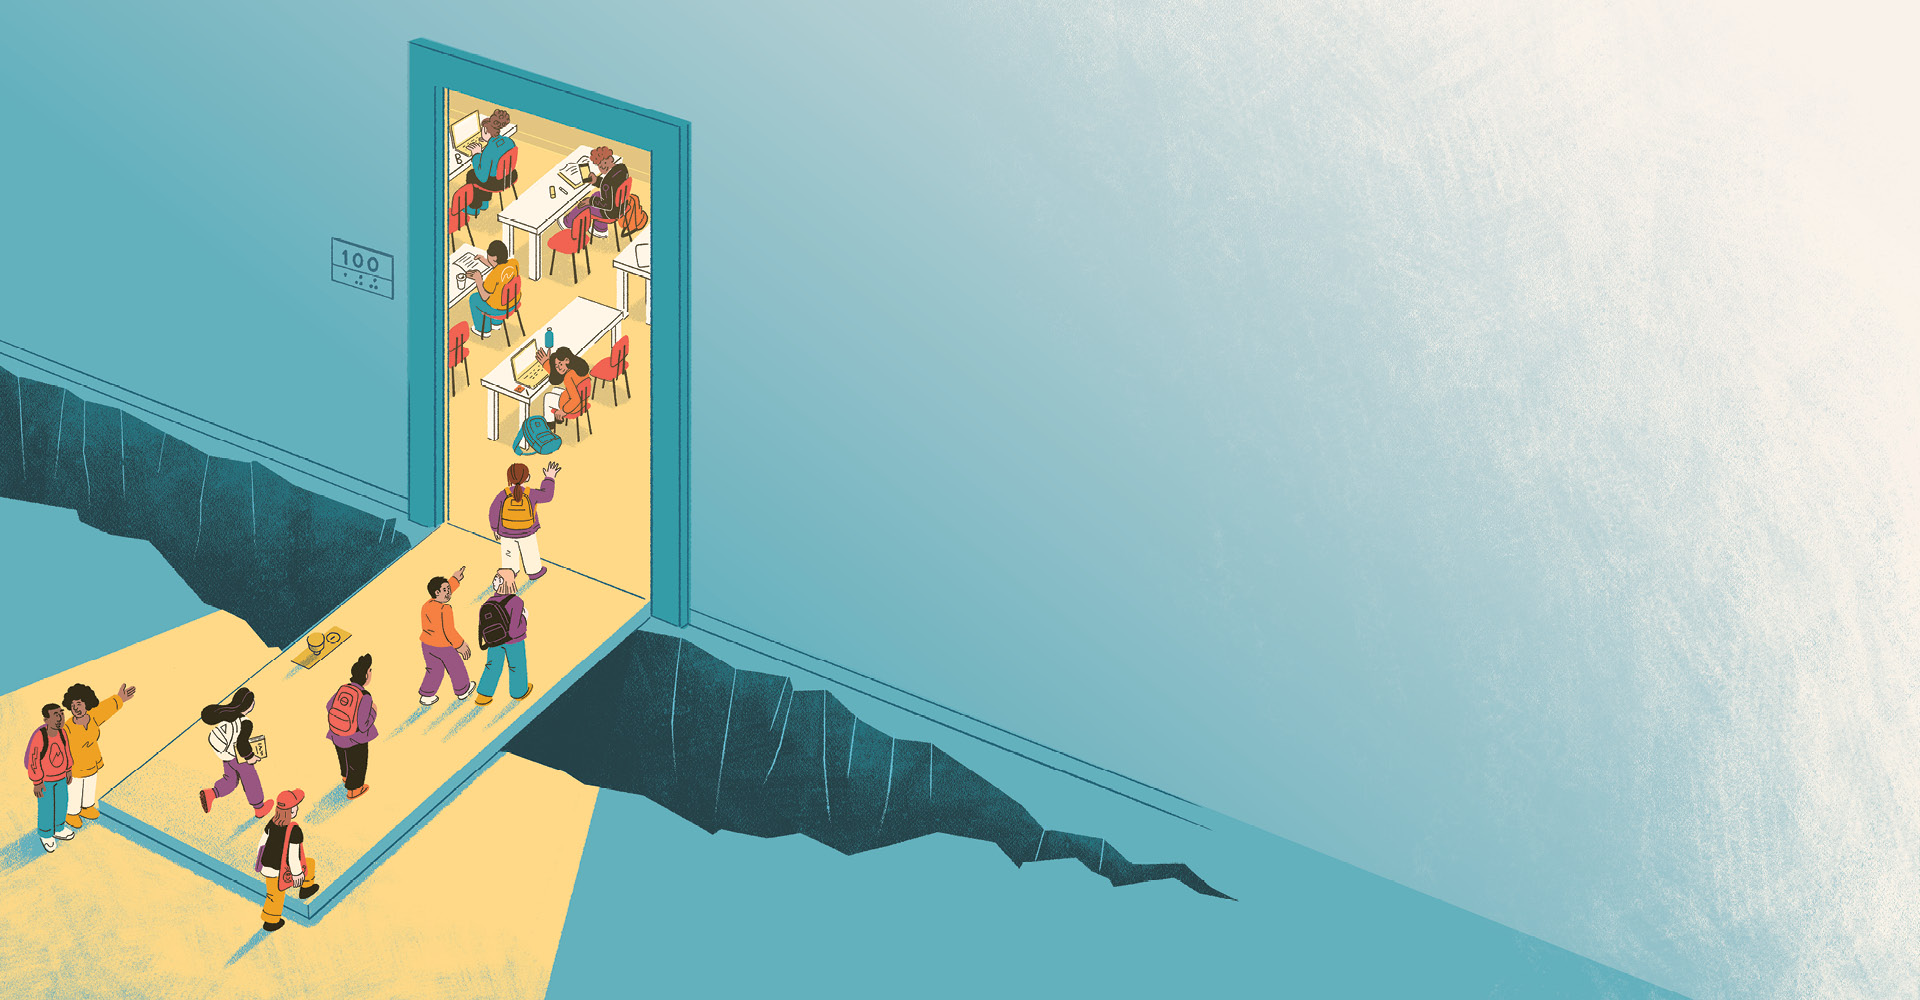 Illustration of students walking into a classroom using the door as a bridge